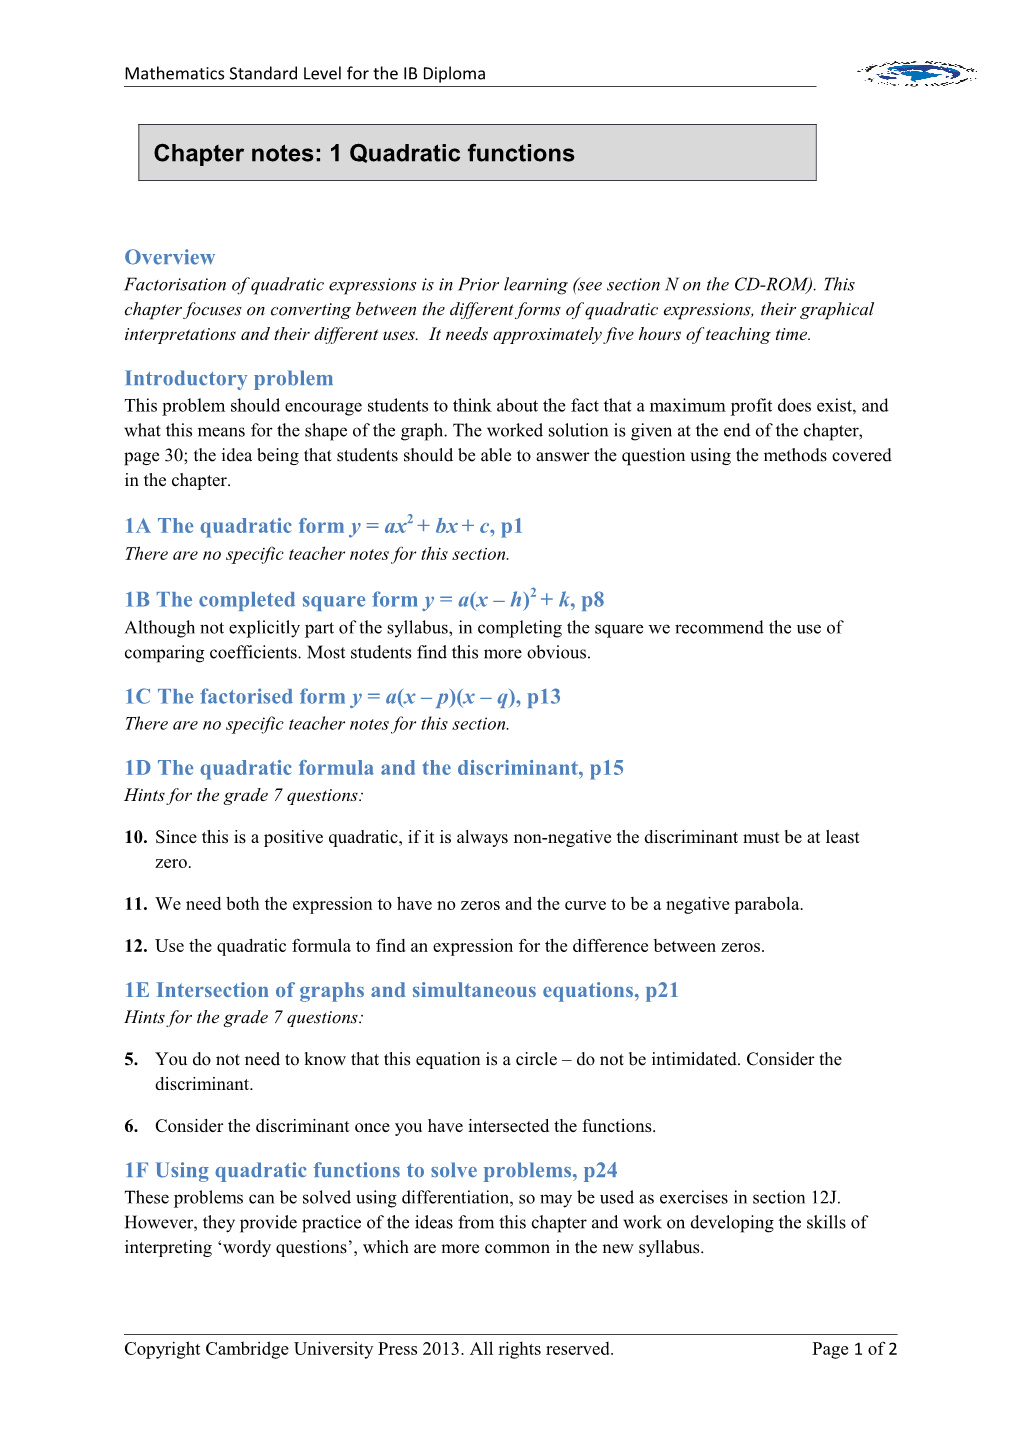 Chapter Notes: 1 Quadratic Functions